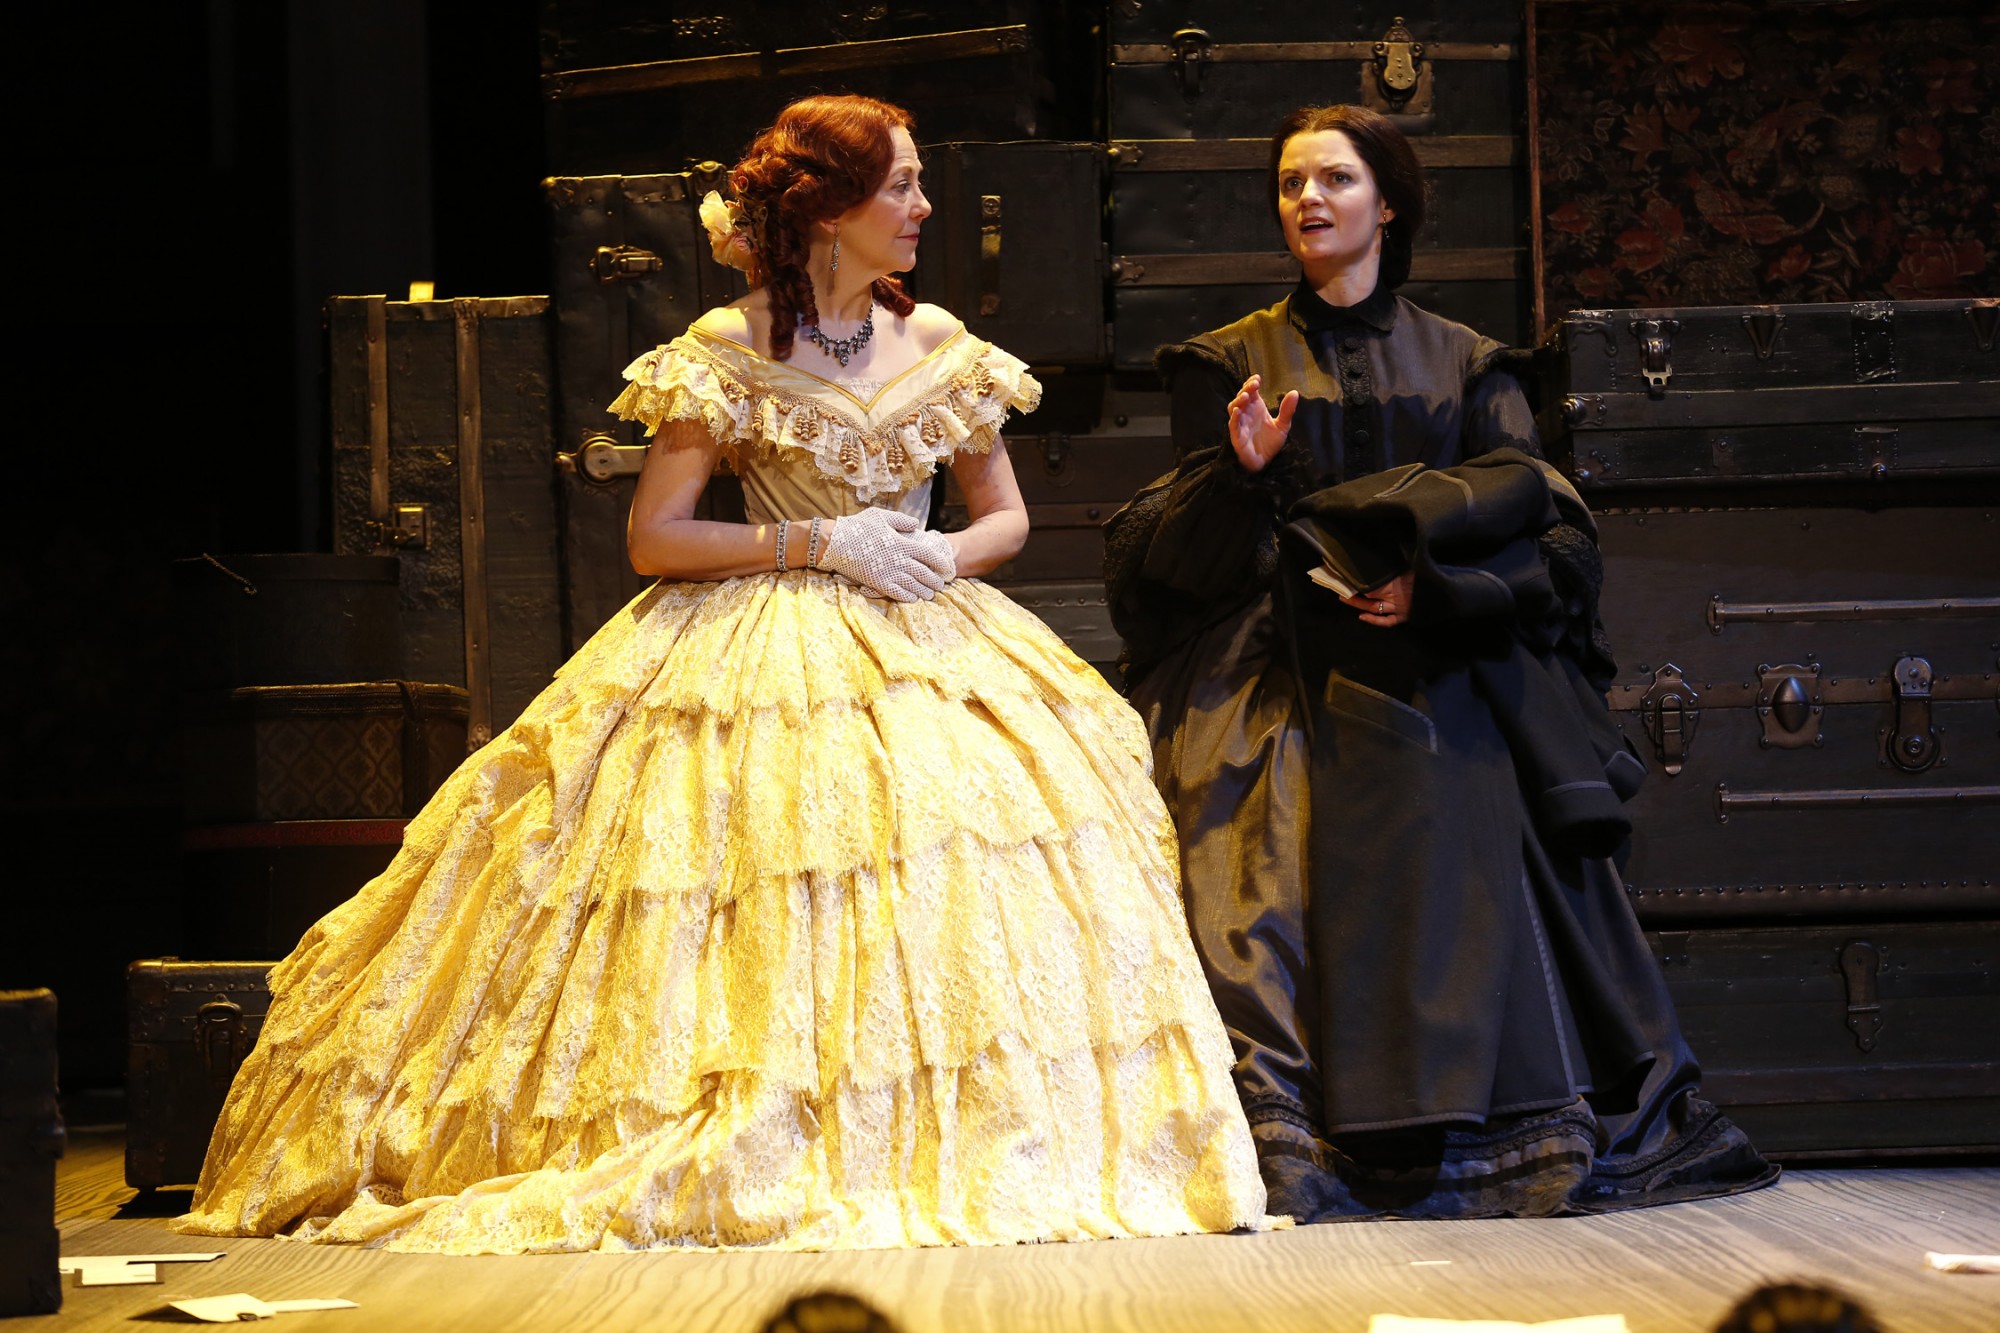 An actress wearing a yellow Victorian gown and white gloves sits beside an actress wearing a black Victorian mourning gown.